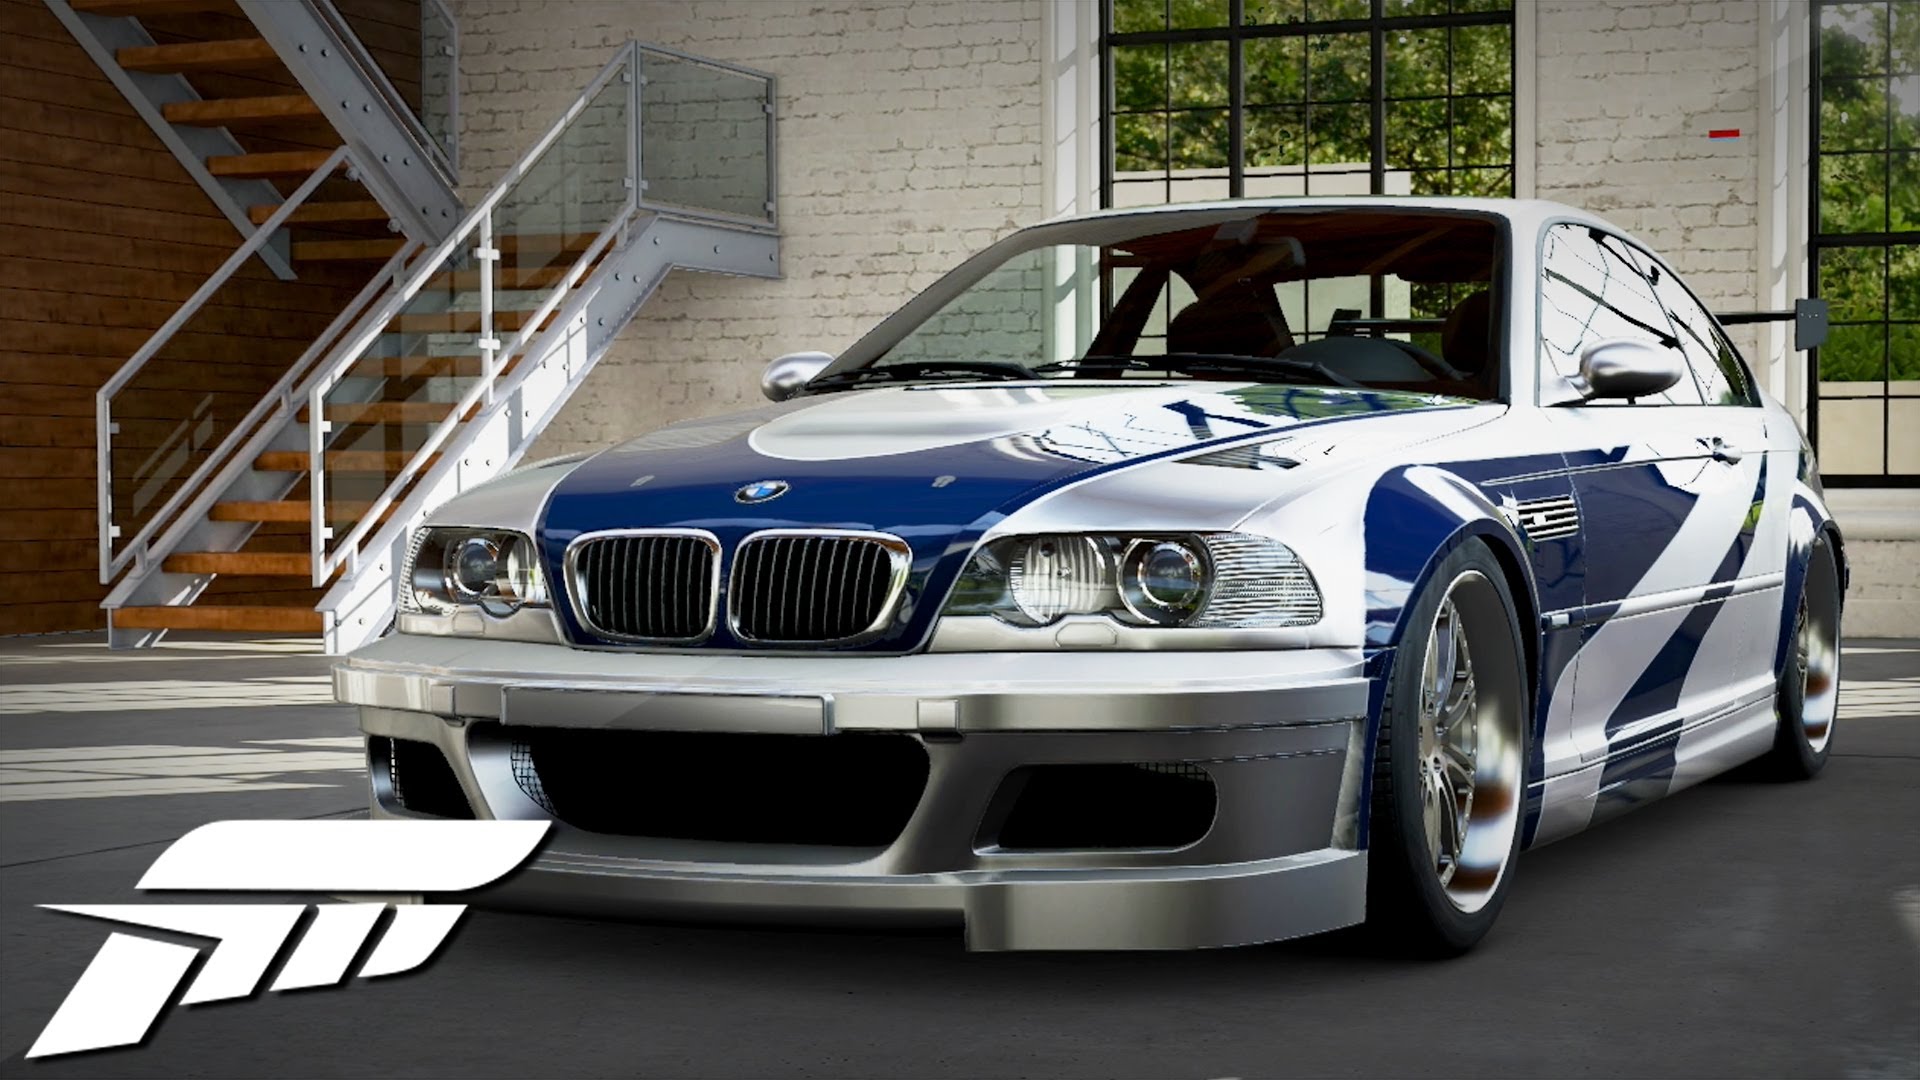 Bmw M3 Gtr HD Wallpaper Full Pictures